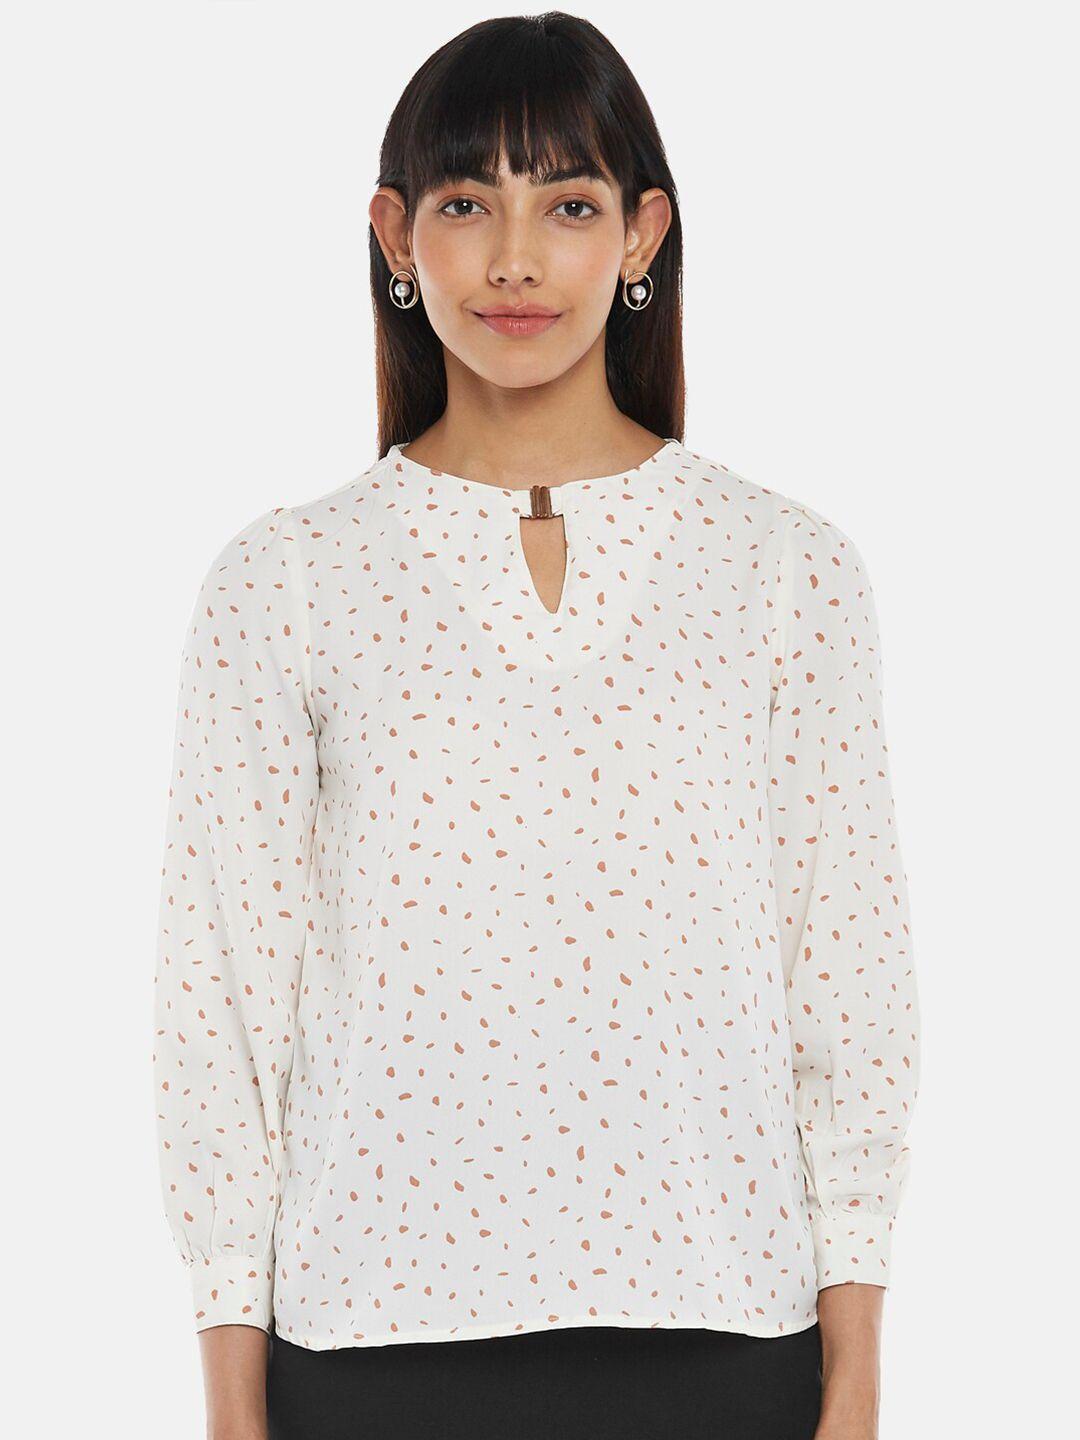 annabelle-by-pantaloons-off-white-floral-print-keyhole-neck-top